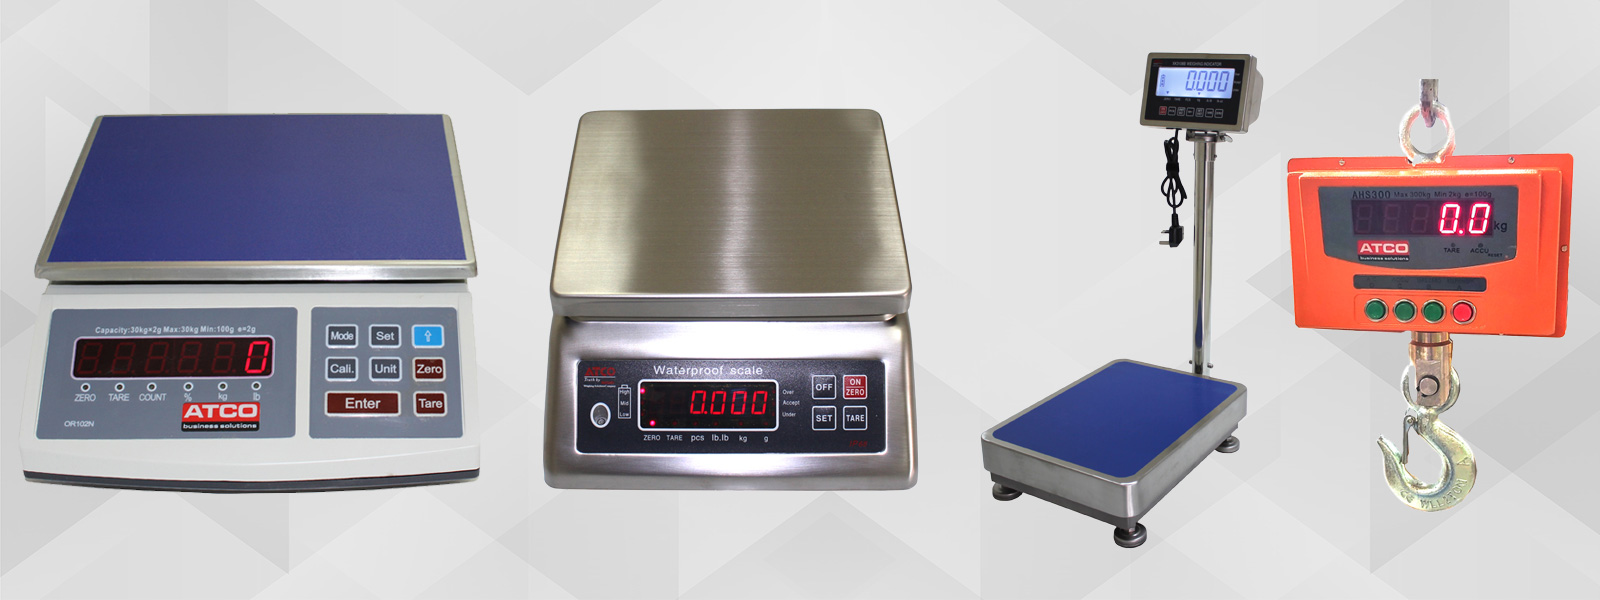 Weighing Scales & Systems